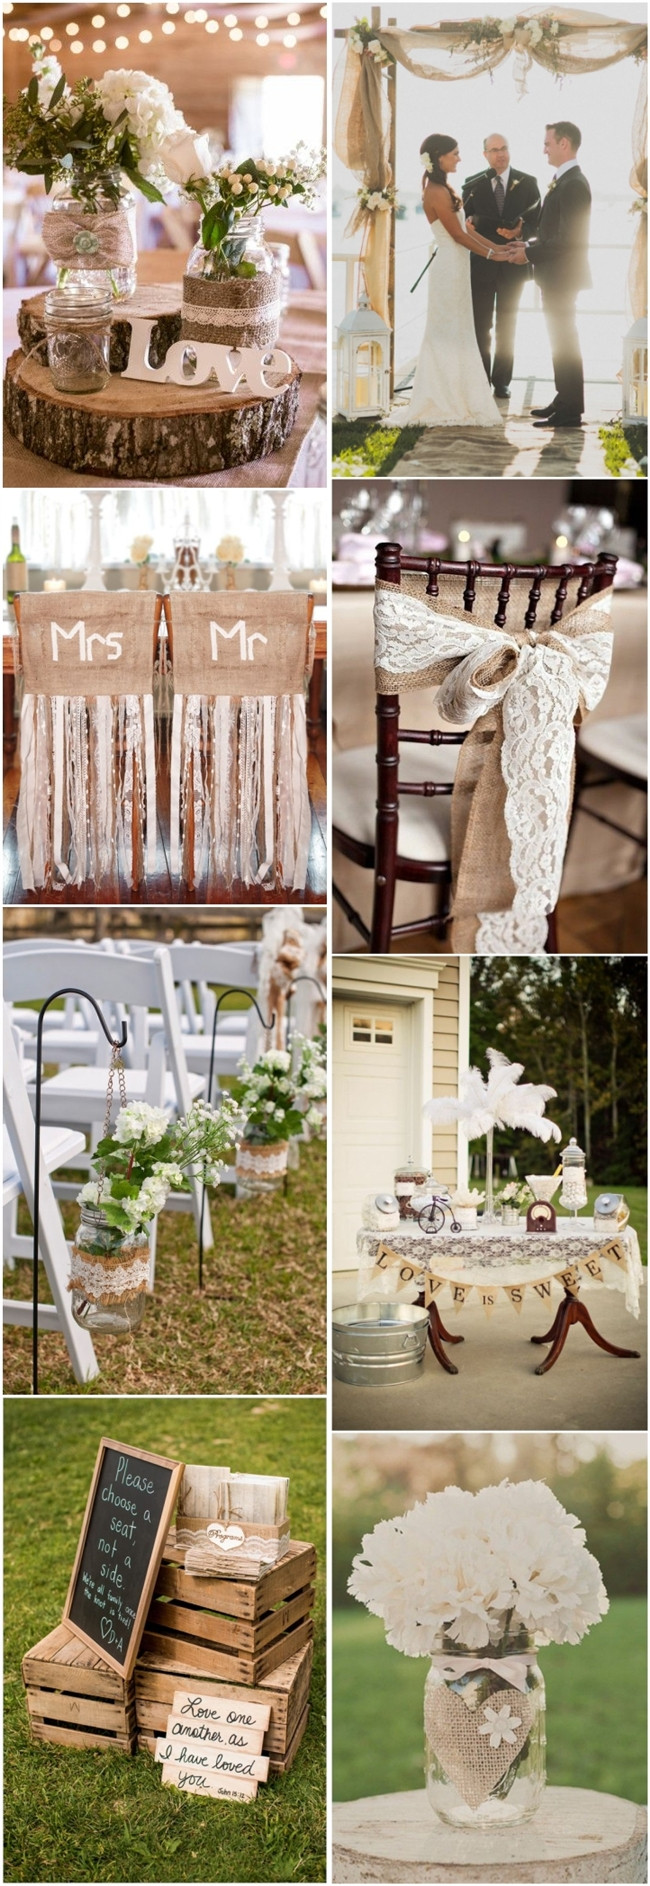 Country Themed Wedding Ideas
 45 Chic Rustic Burlap & Lace Wedding Ideas and Inspiration